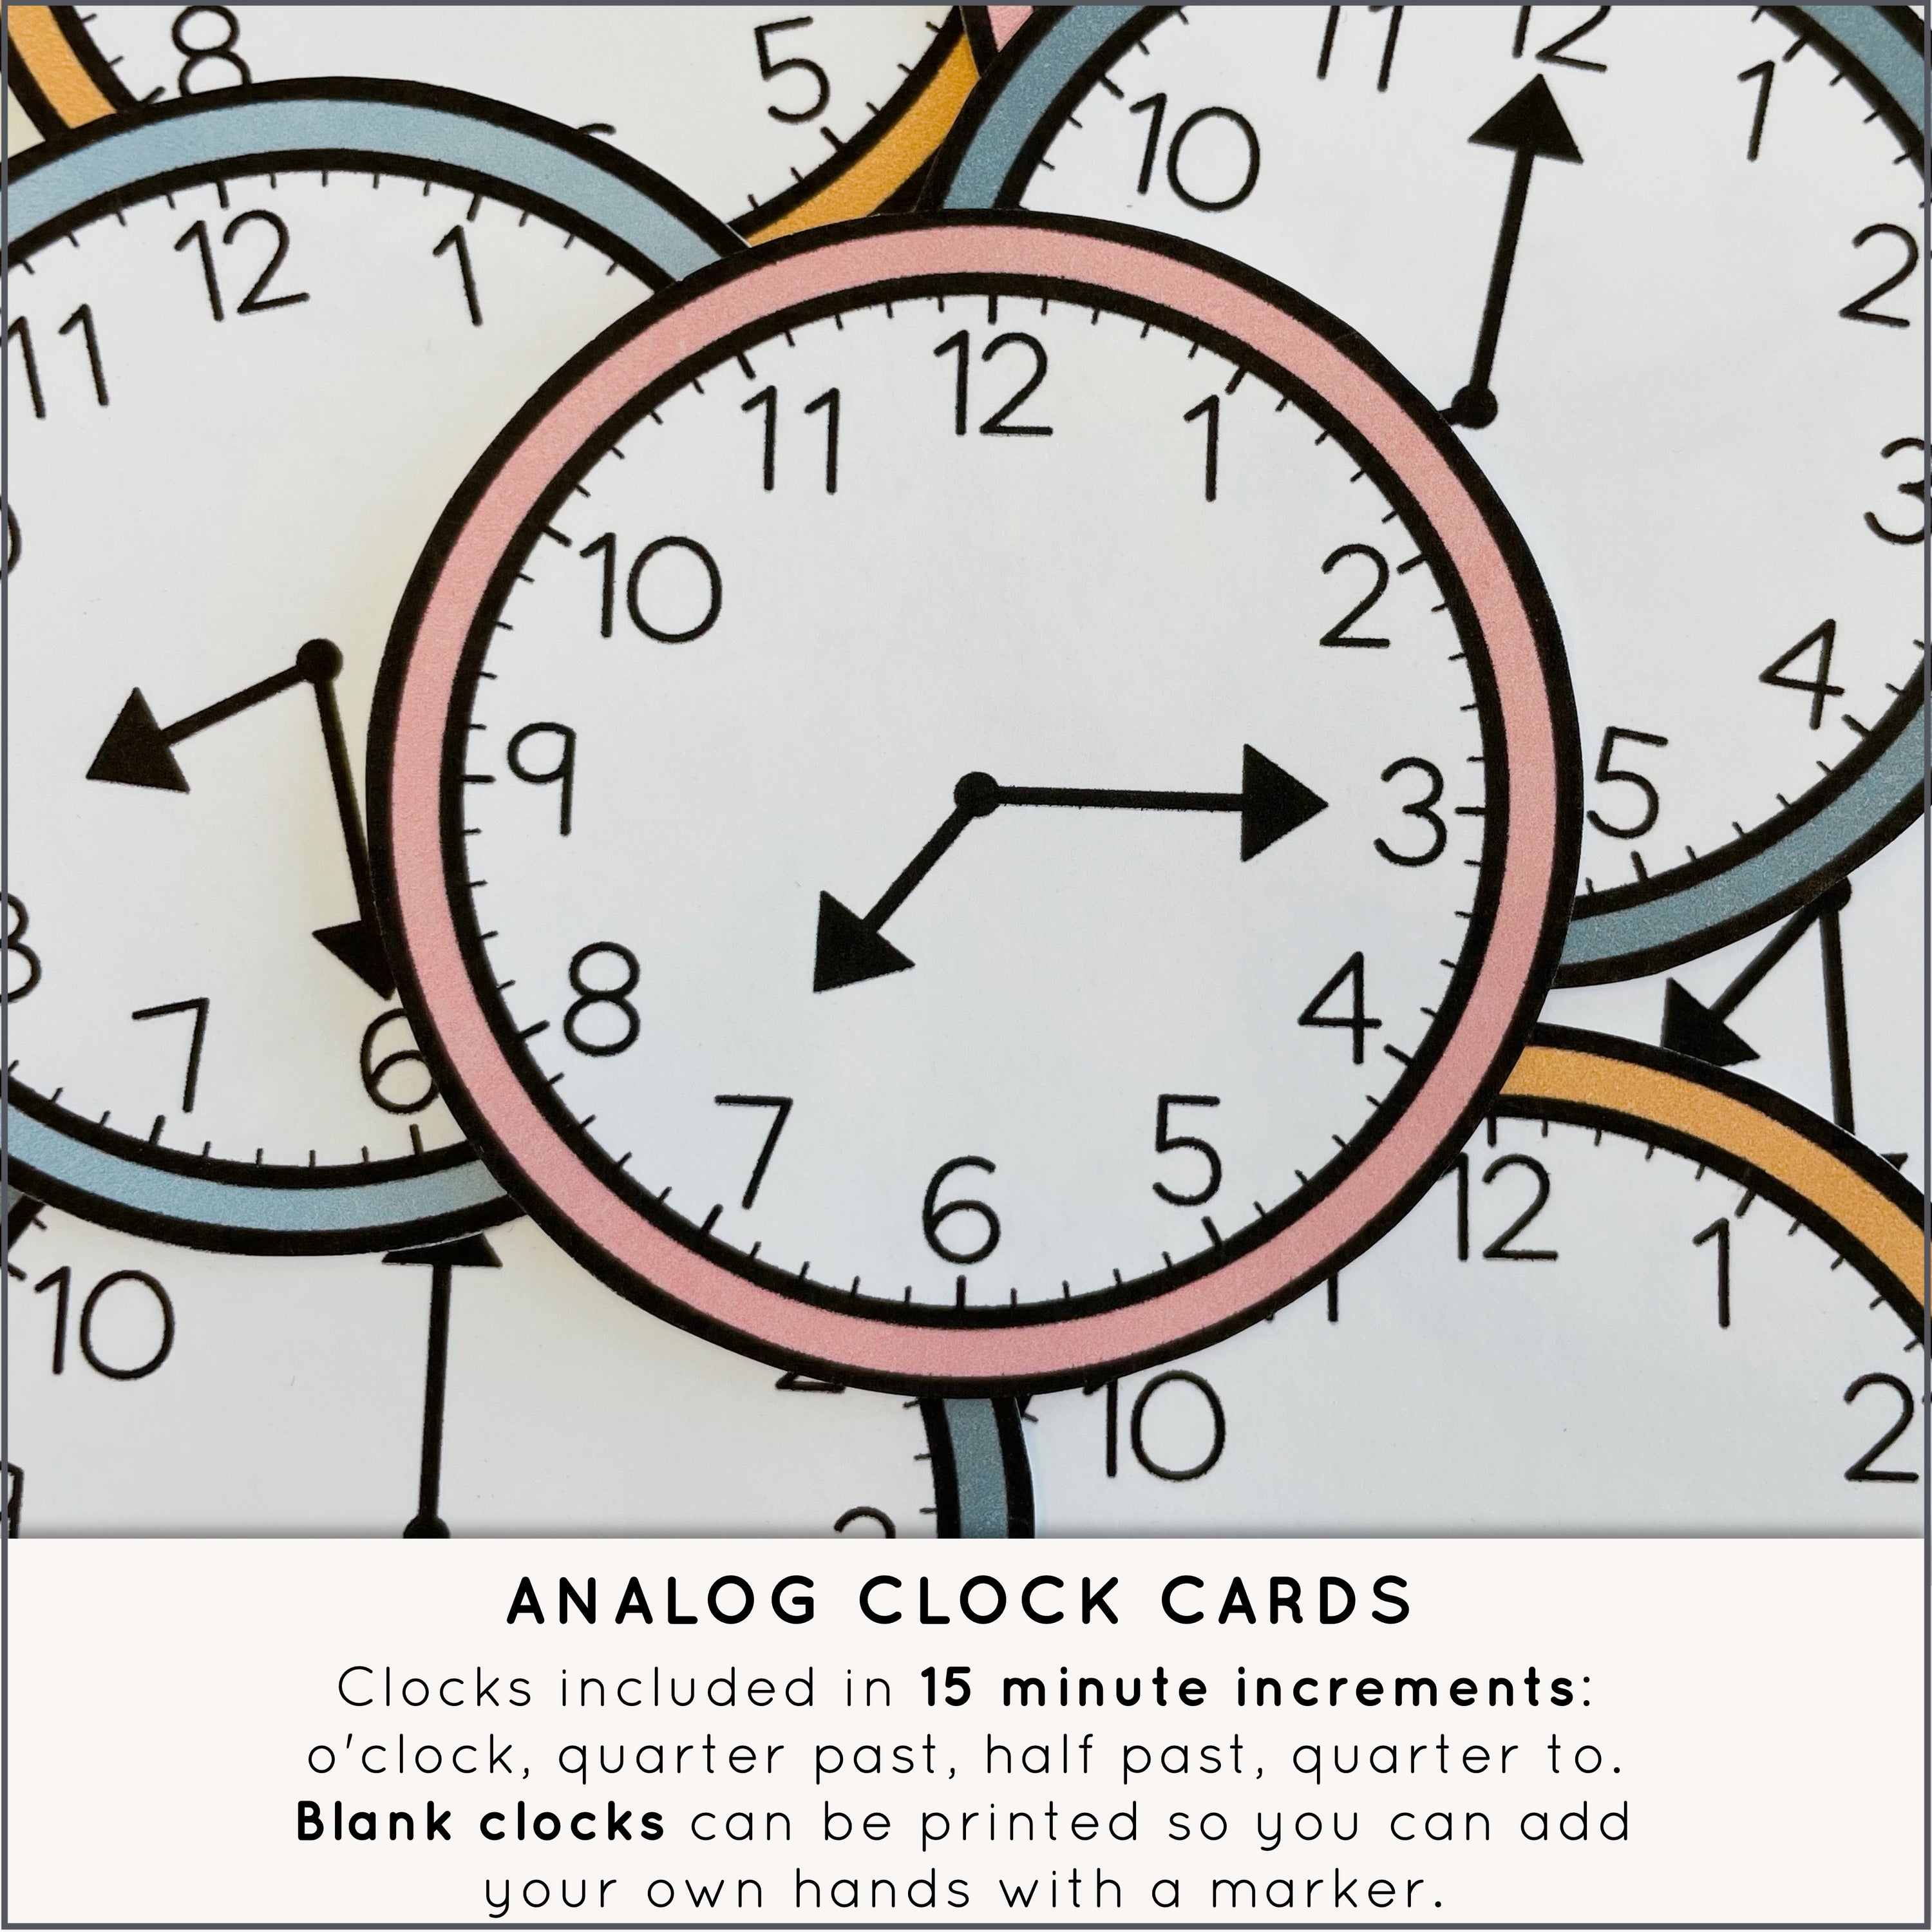 Classroom Schedule Cards with Analog and Digital Clocks